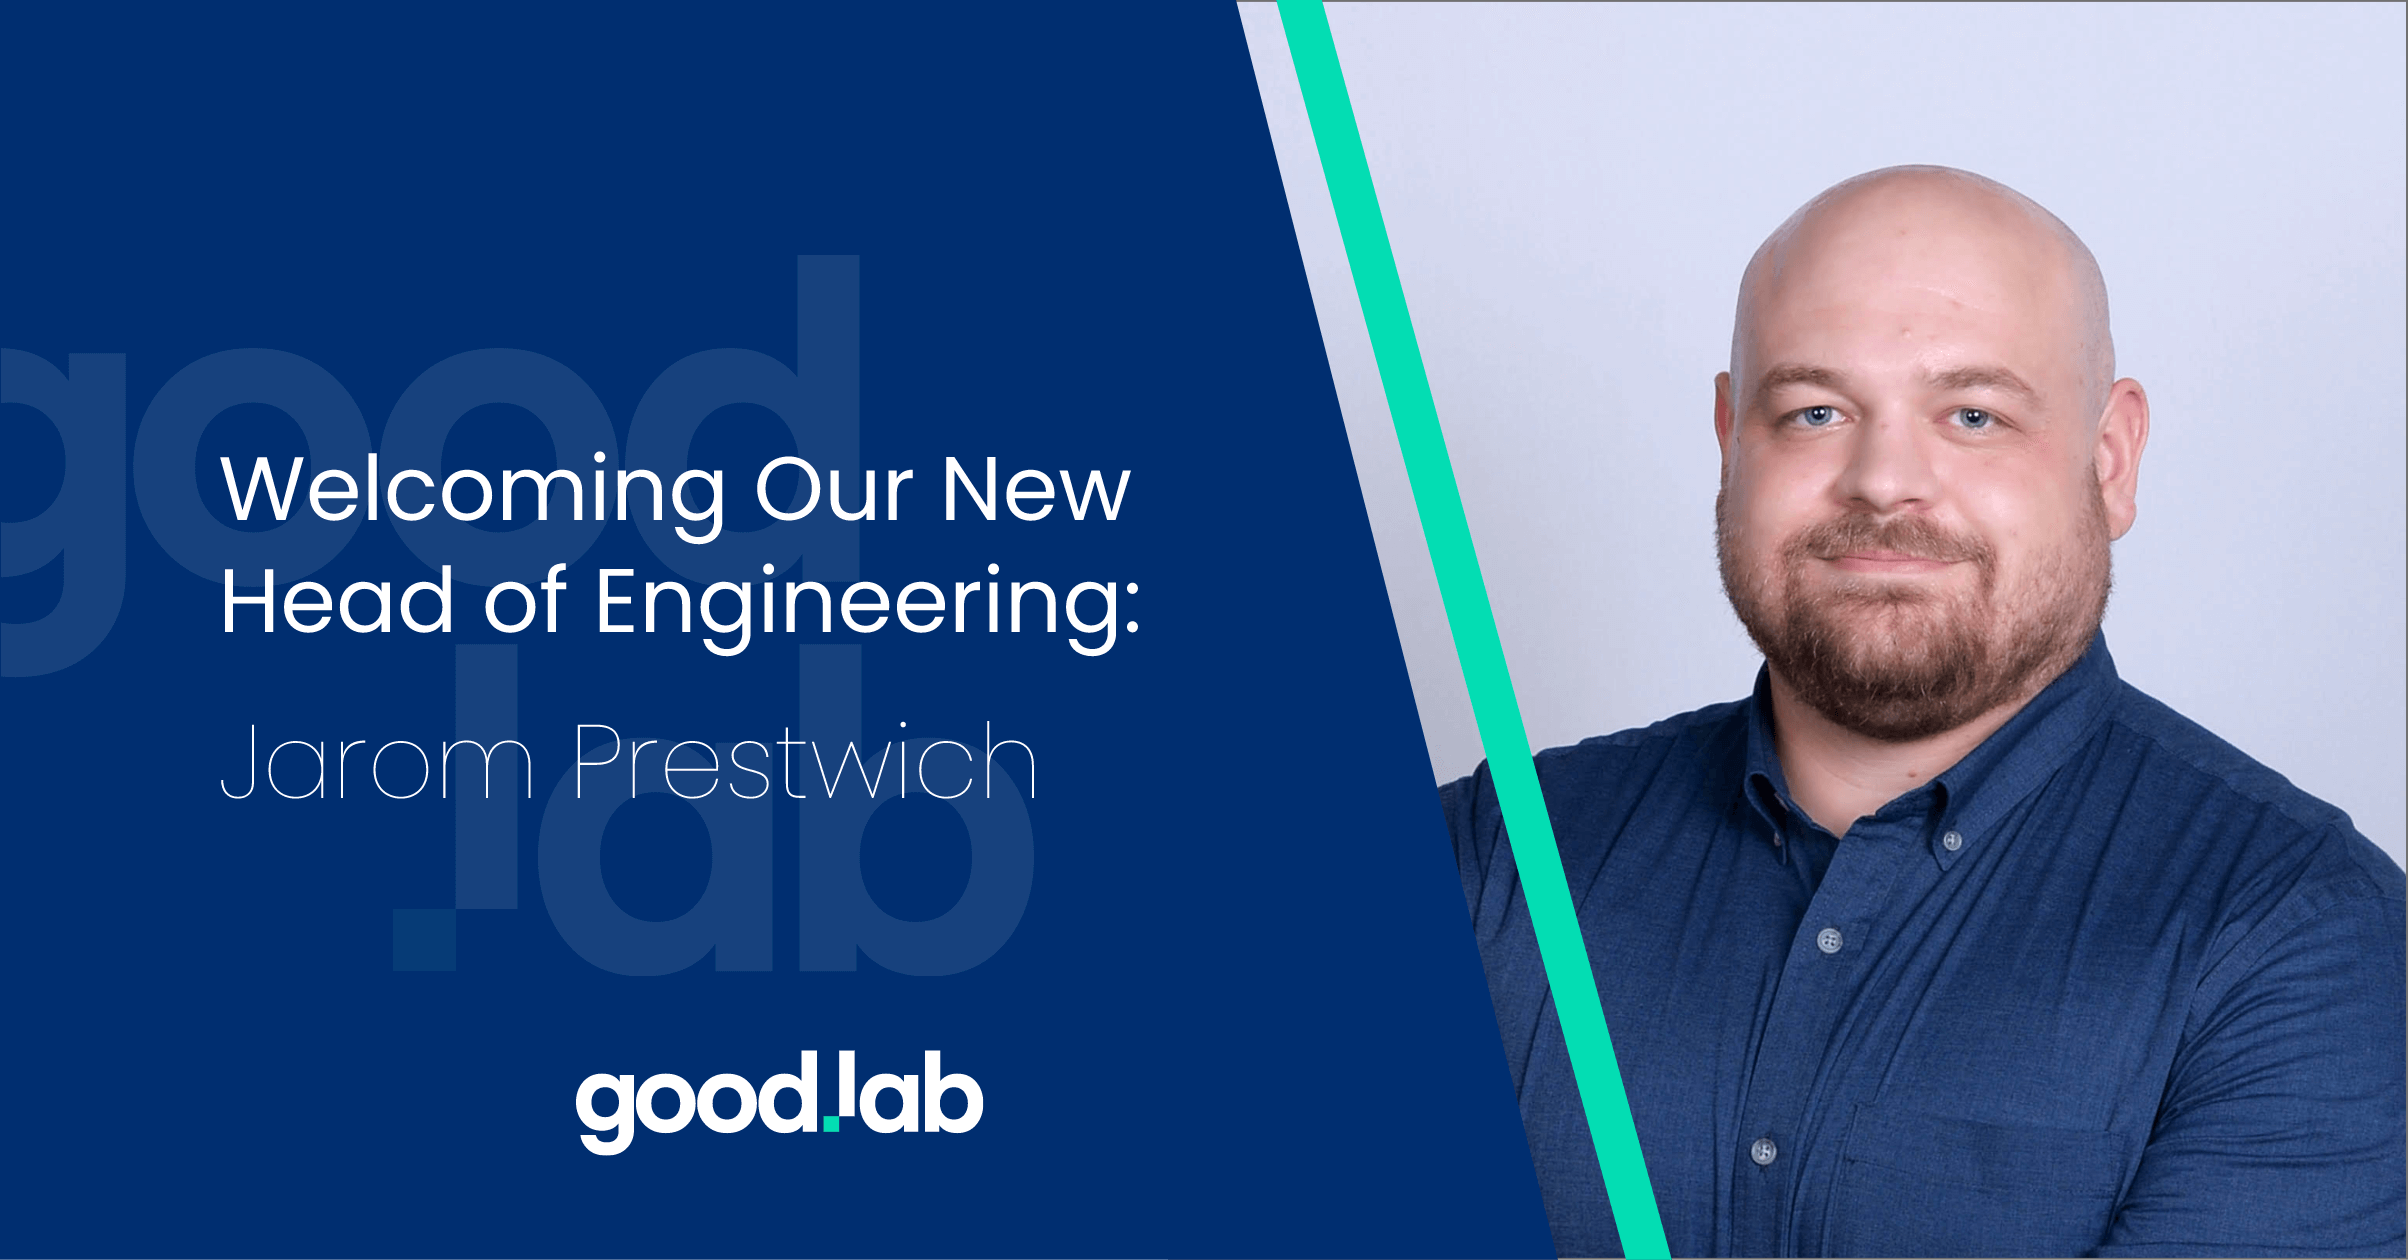 Good.Lab Welcomes A New Head of Engineering